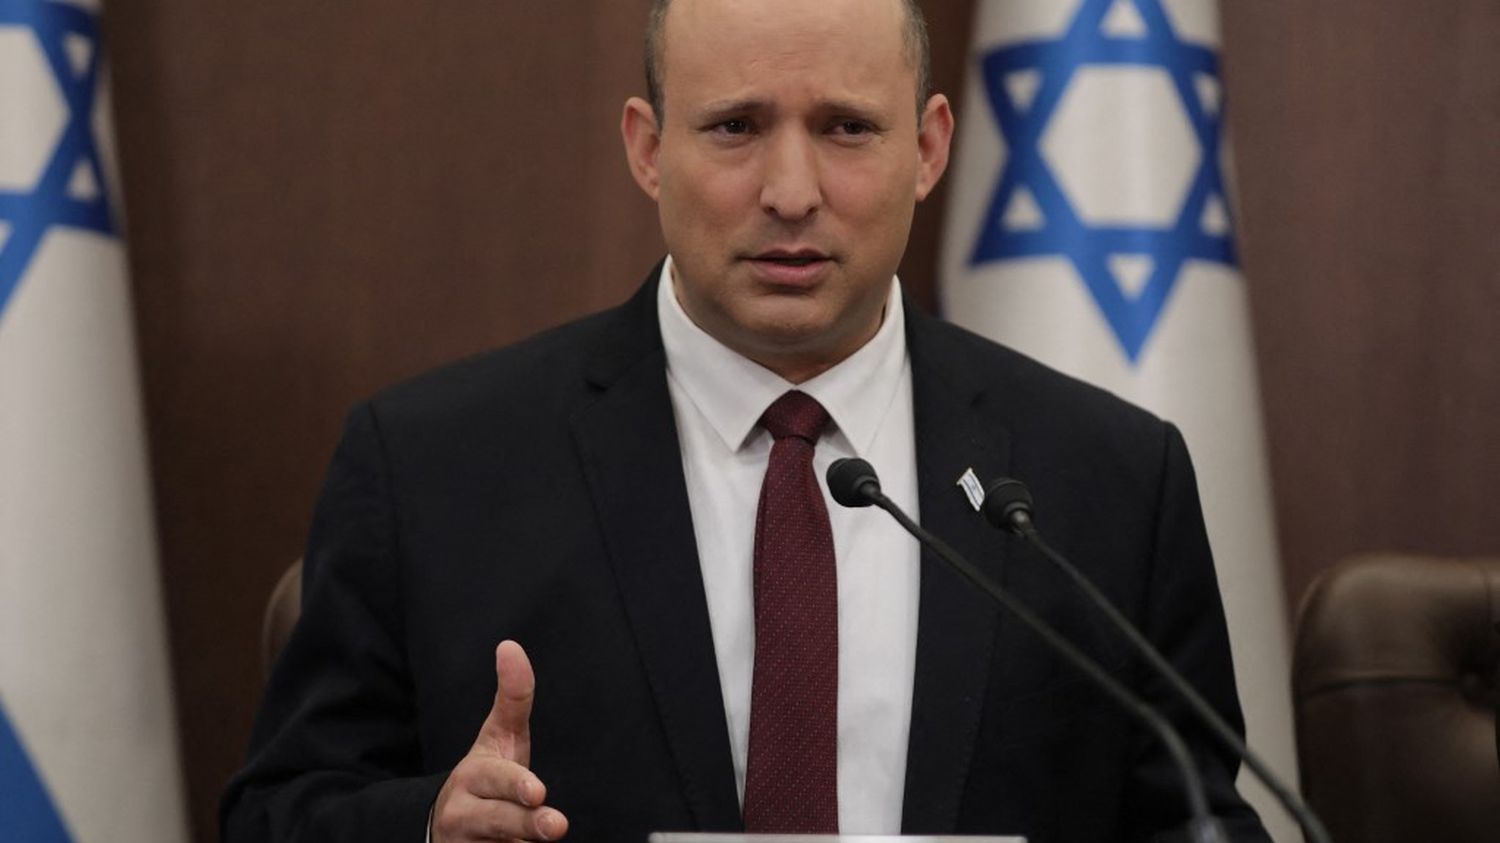 Israel: Prime Minister Naftali Bennett wants to dissolve Parliament and call early legislative elections
